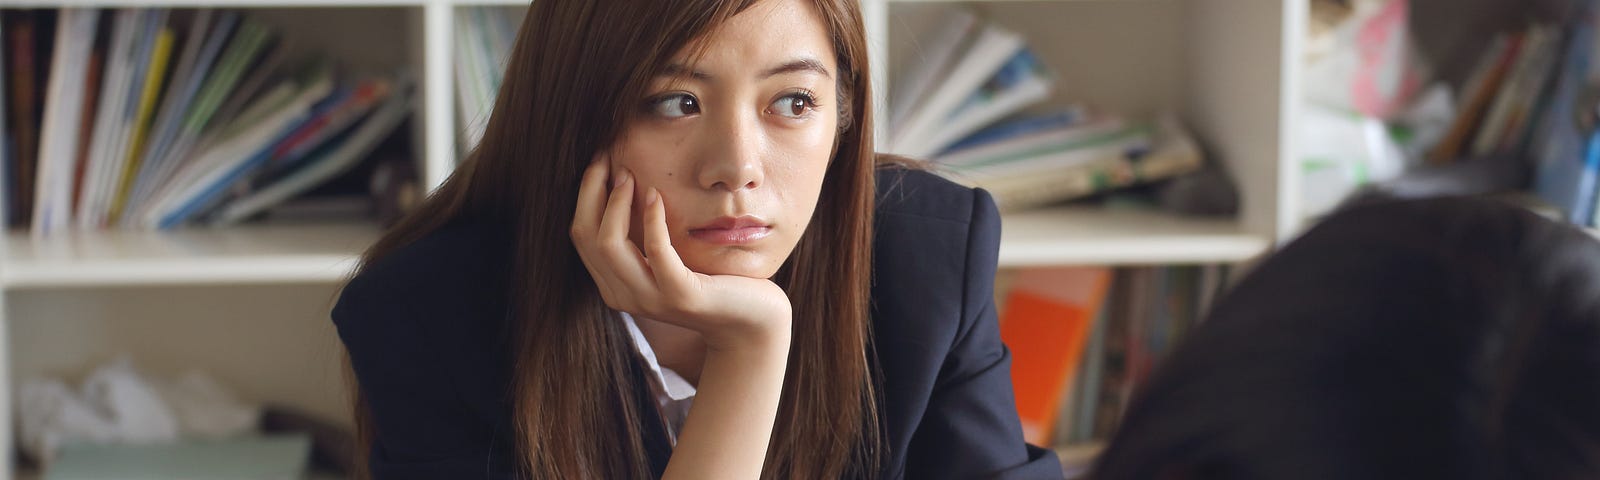 Teenage student sitting at desk in classroom with chin resting on her hand